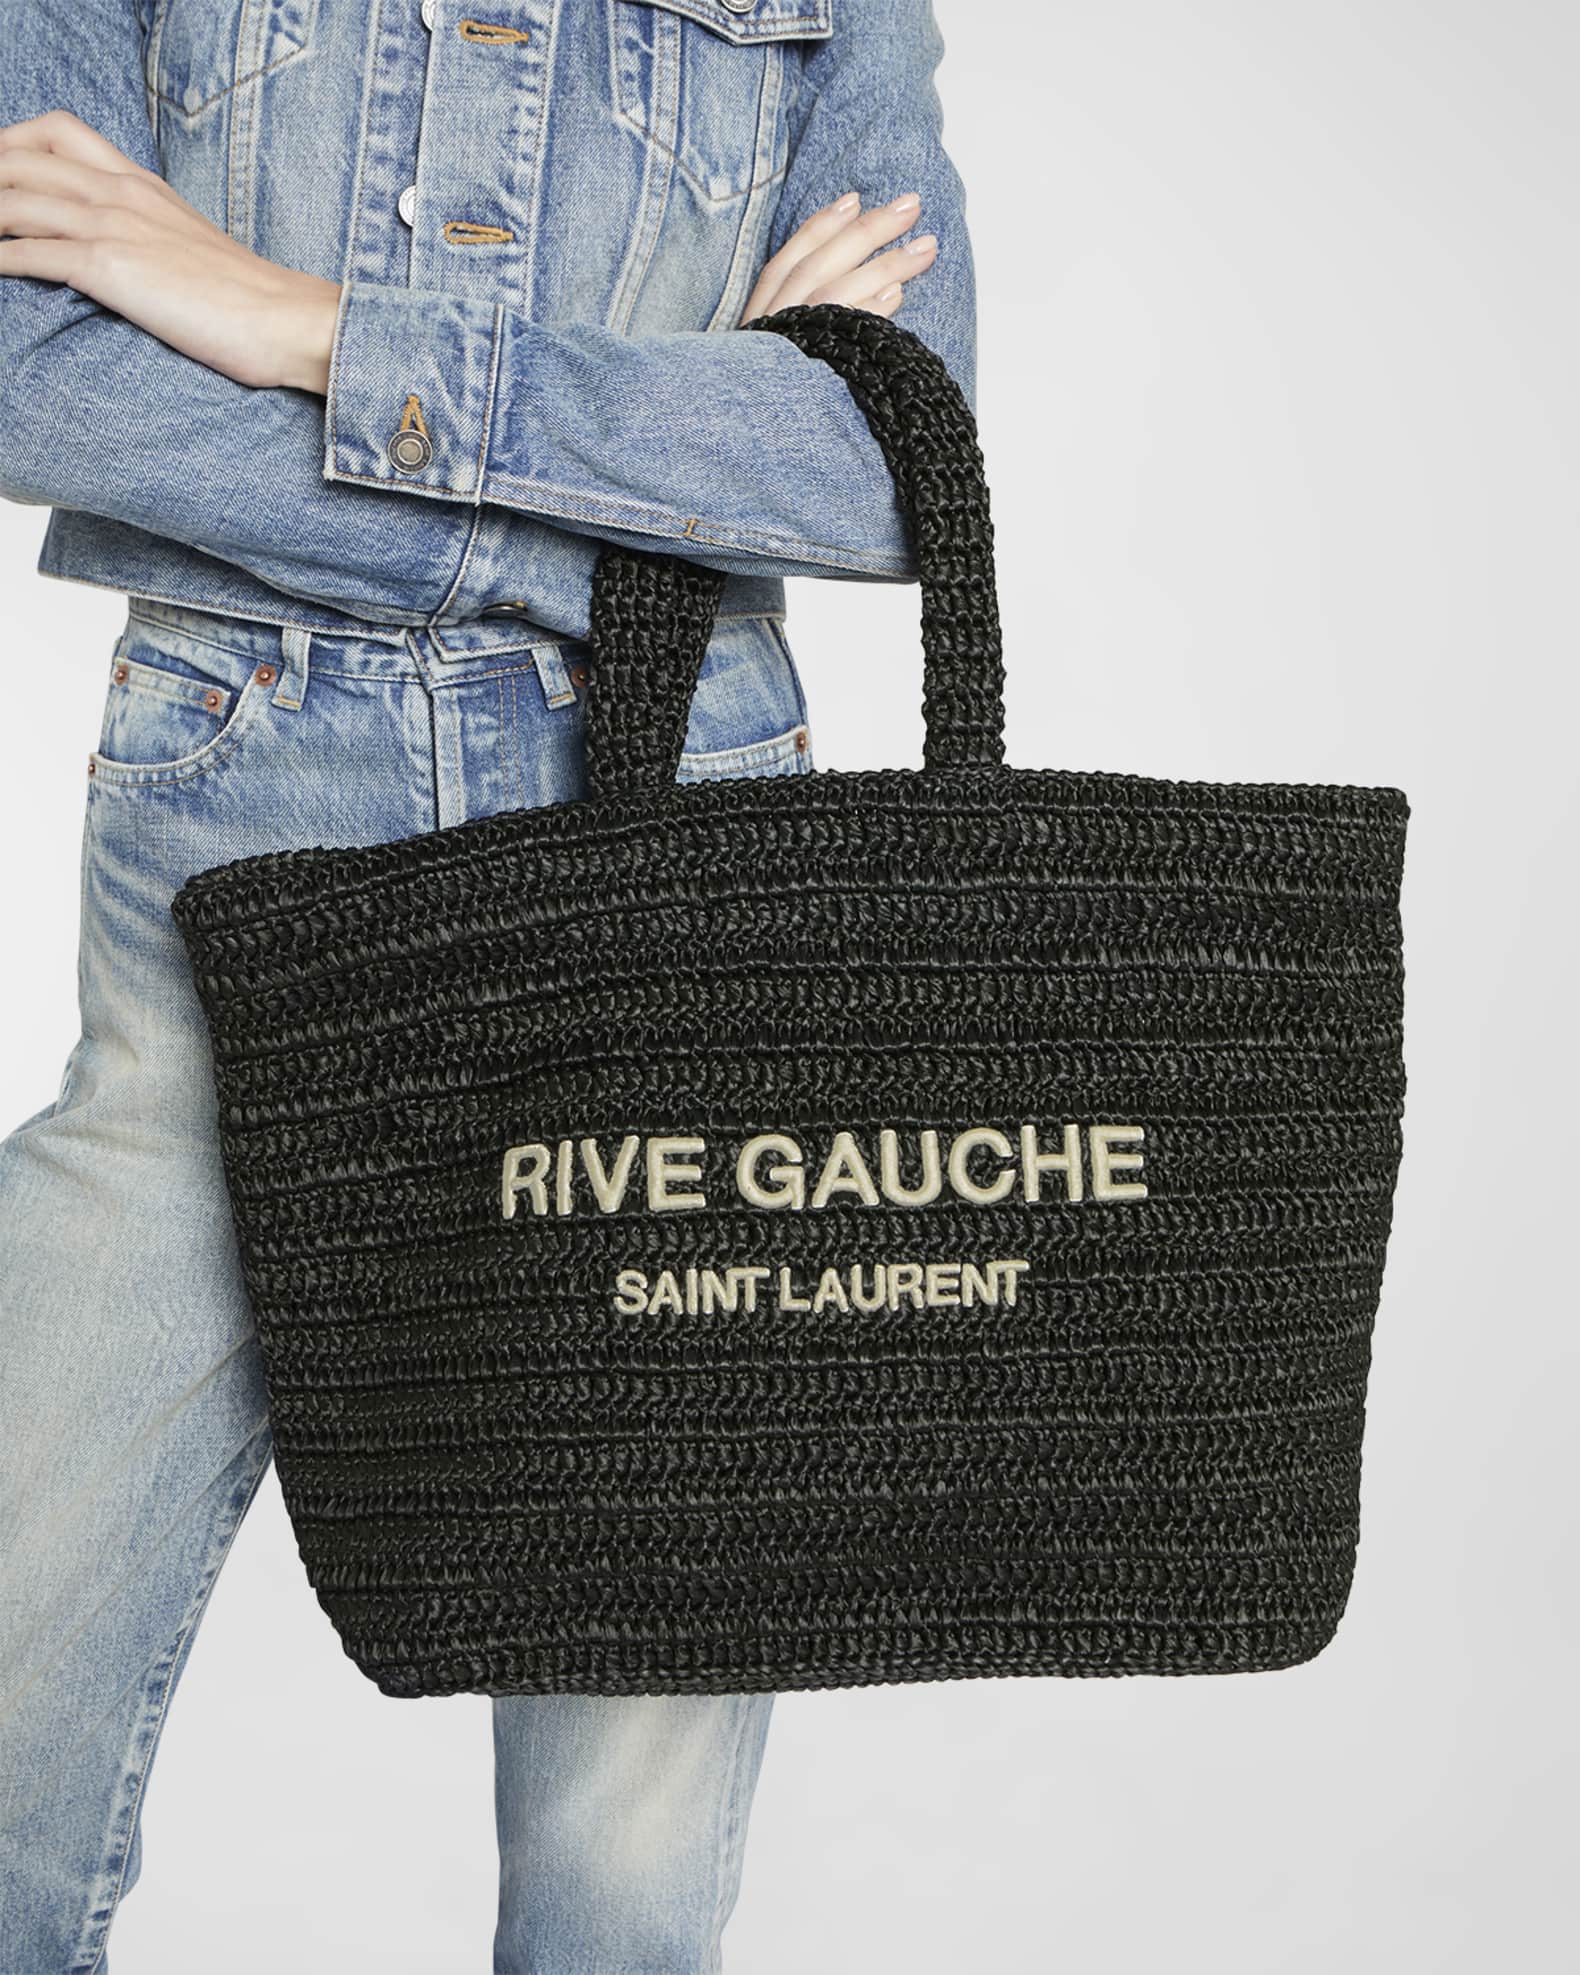 The world's most luxurious beach bag - The Saint Laurent Rive Gauche Tote*  - The Luxe List